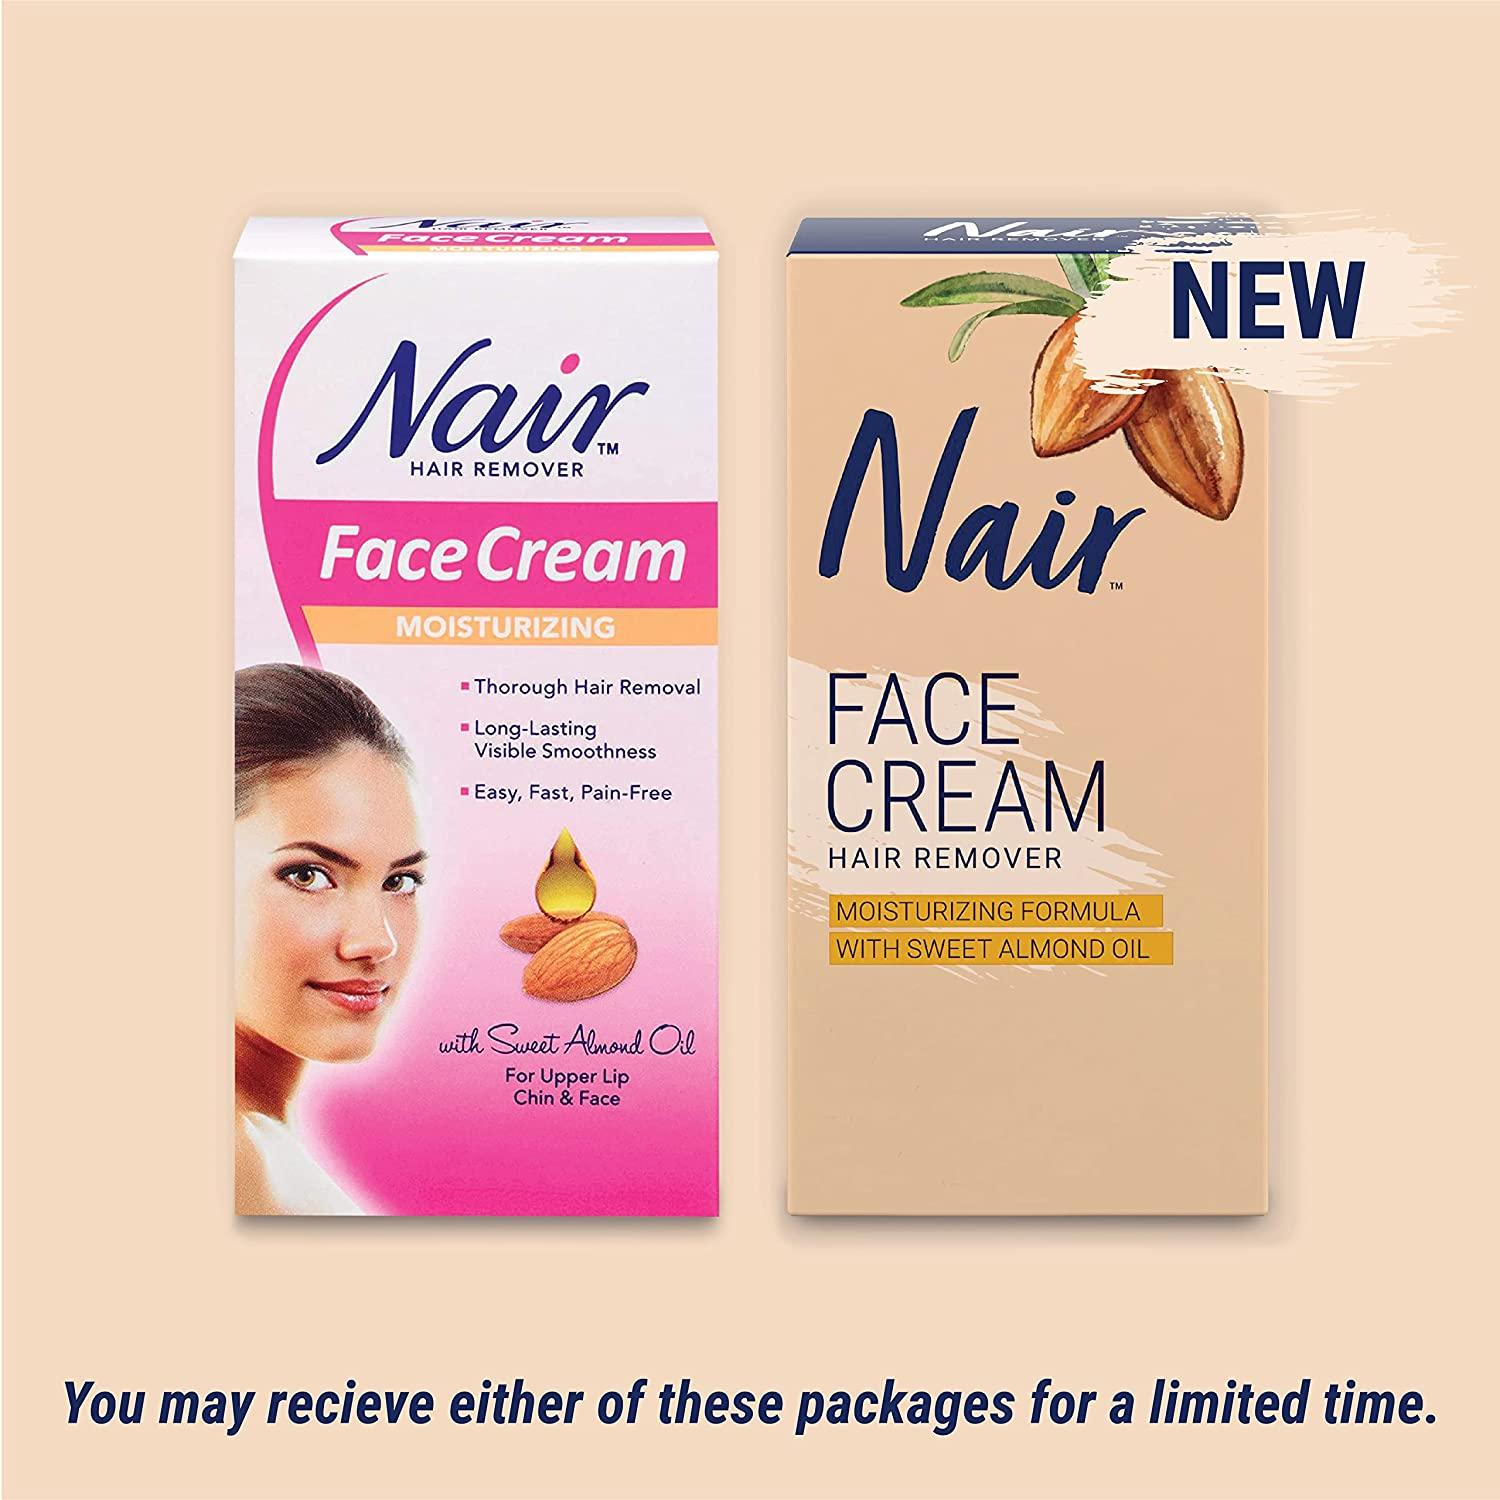 Nair Hair Remover Moisturizing Face Cream For Upper Lip Chin and Face 2 oz  (57 g)